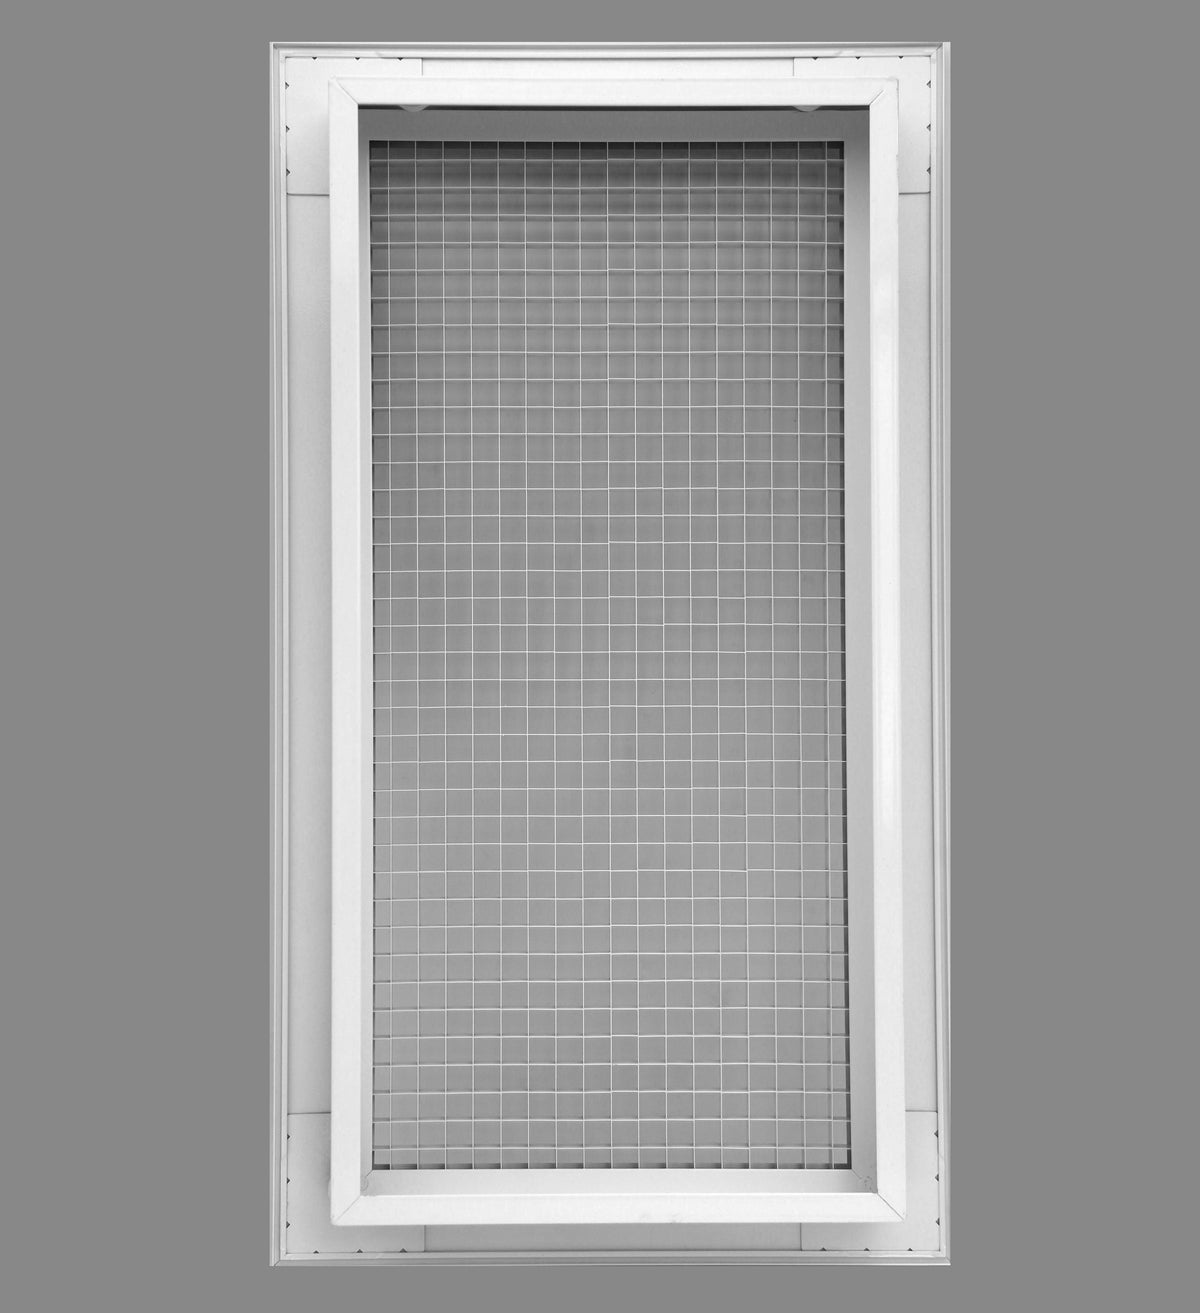 12&quot; x 18&quot; Cube Core Eggcrate Return Air Filter Grille for 1&quot; Filter